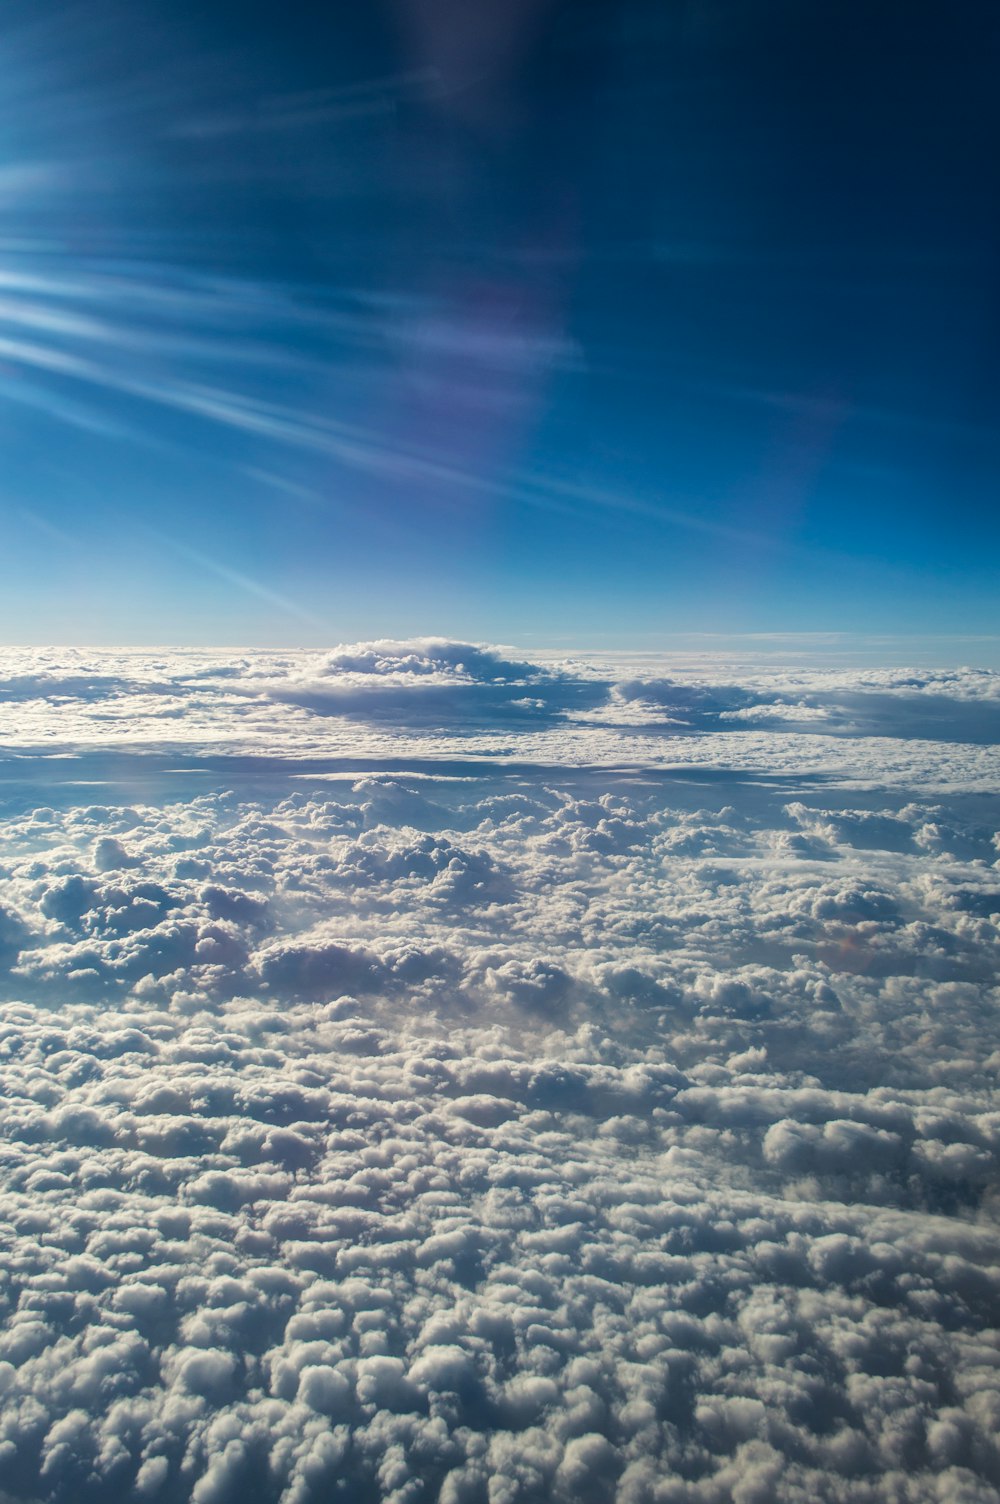 sea of clouds at daytime